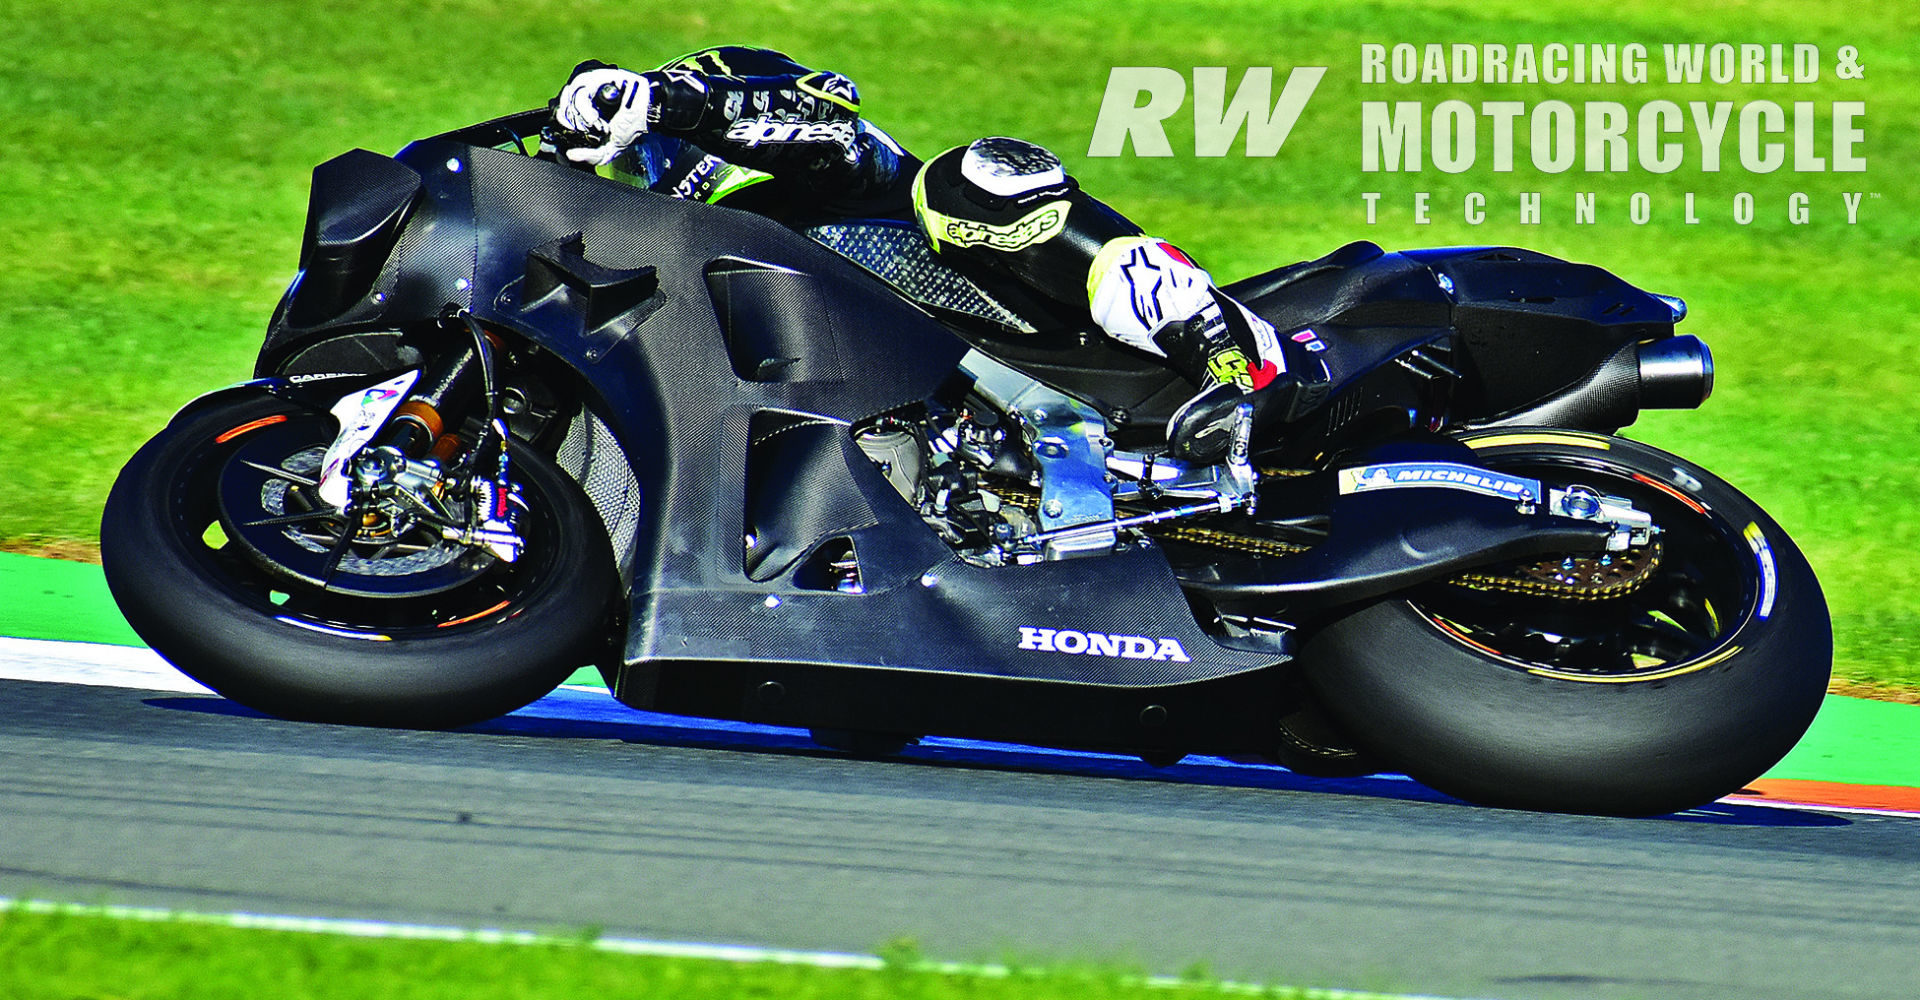 The first day of testing for the 2020 season took place in Valencia, with factory teams testing new engine, chassis, and aero components. LCR Honda rider Cal Crutchlow is seen here testing new HRC components. Photo by Michael Gougis.